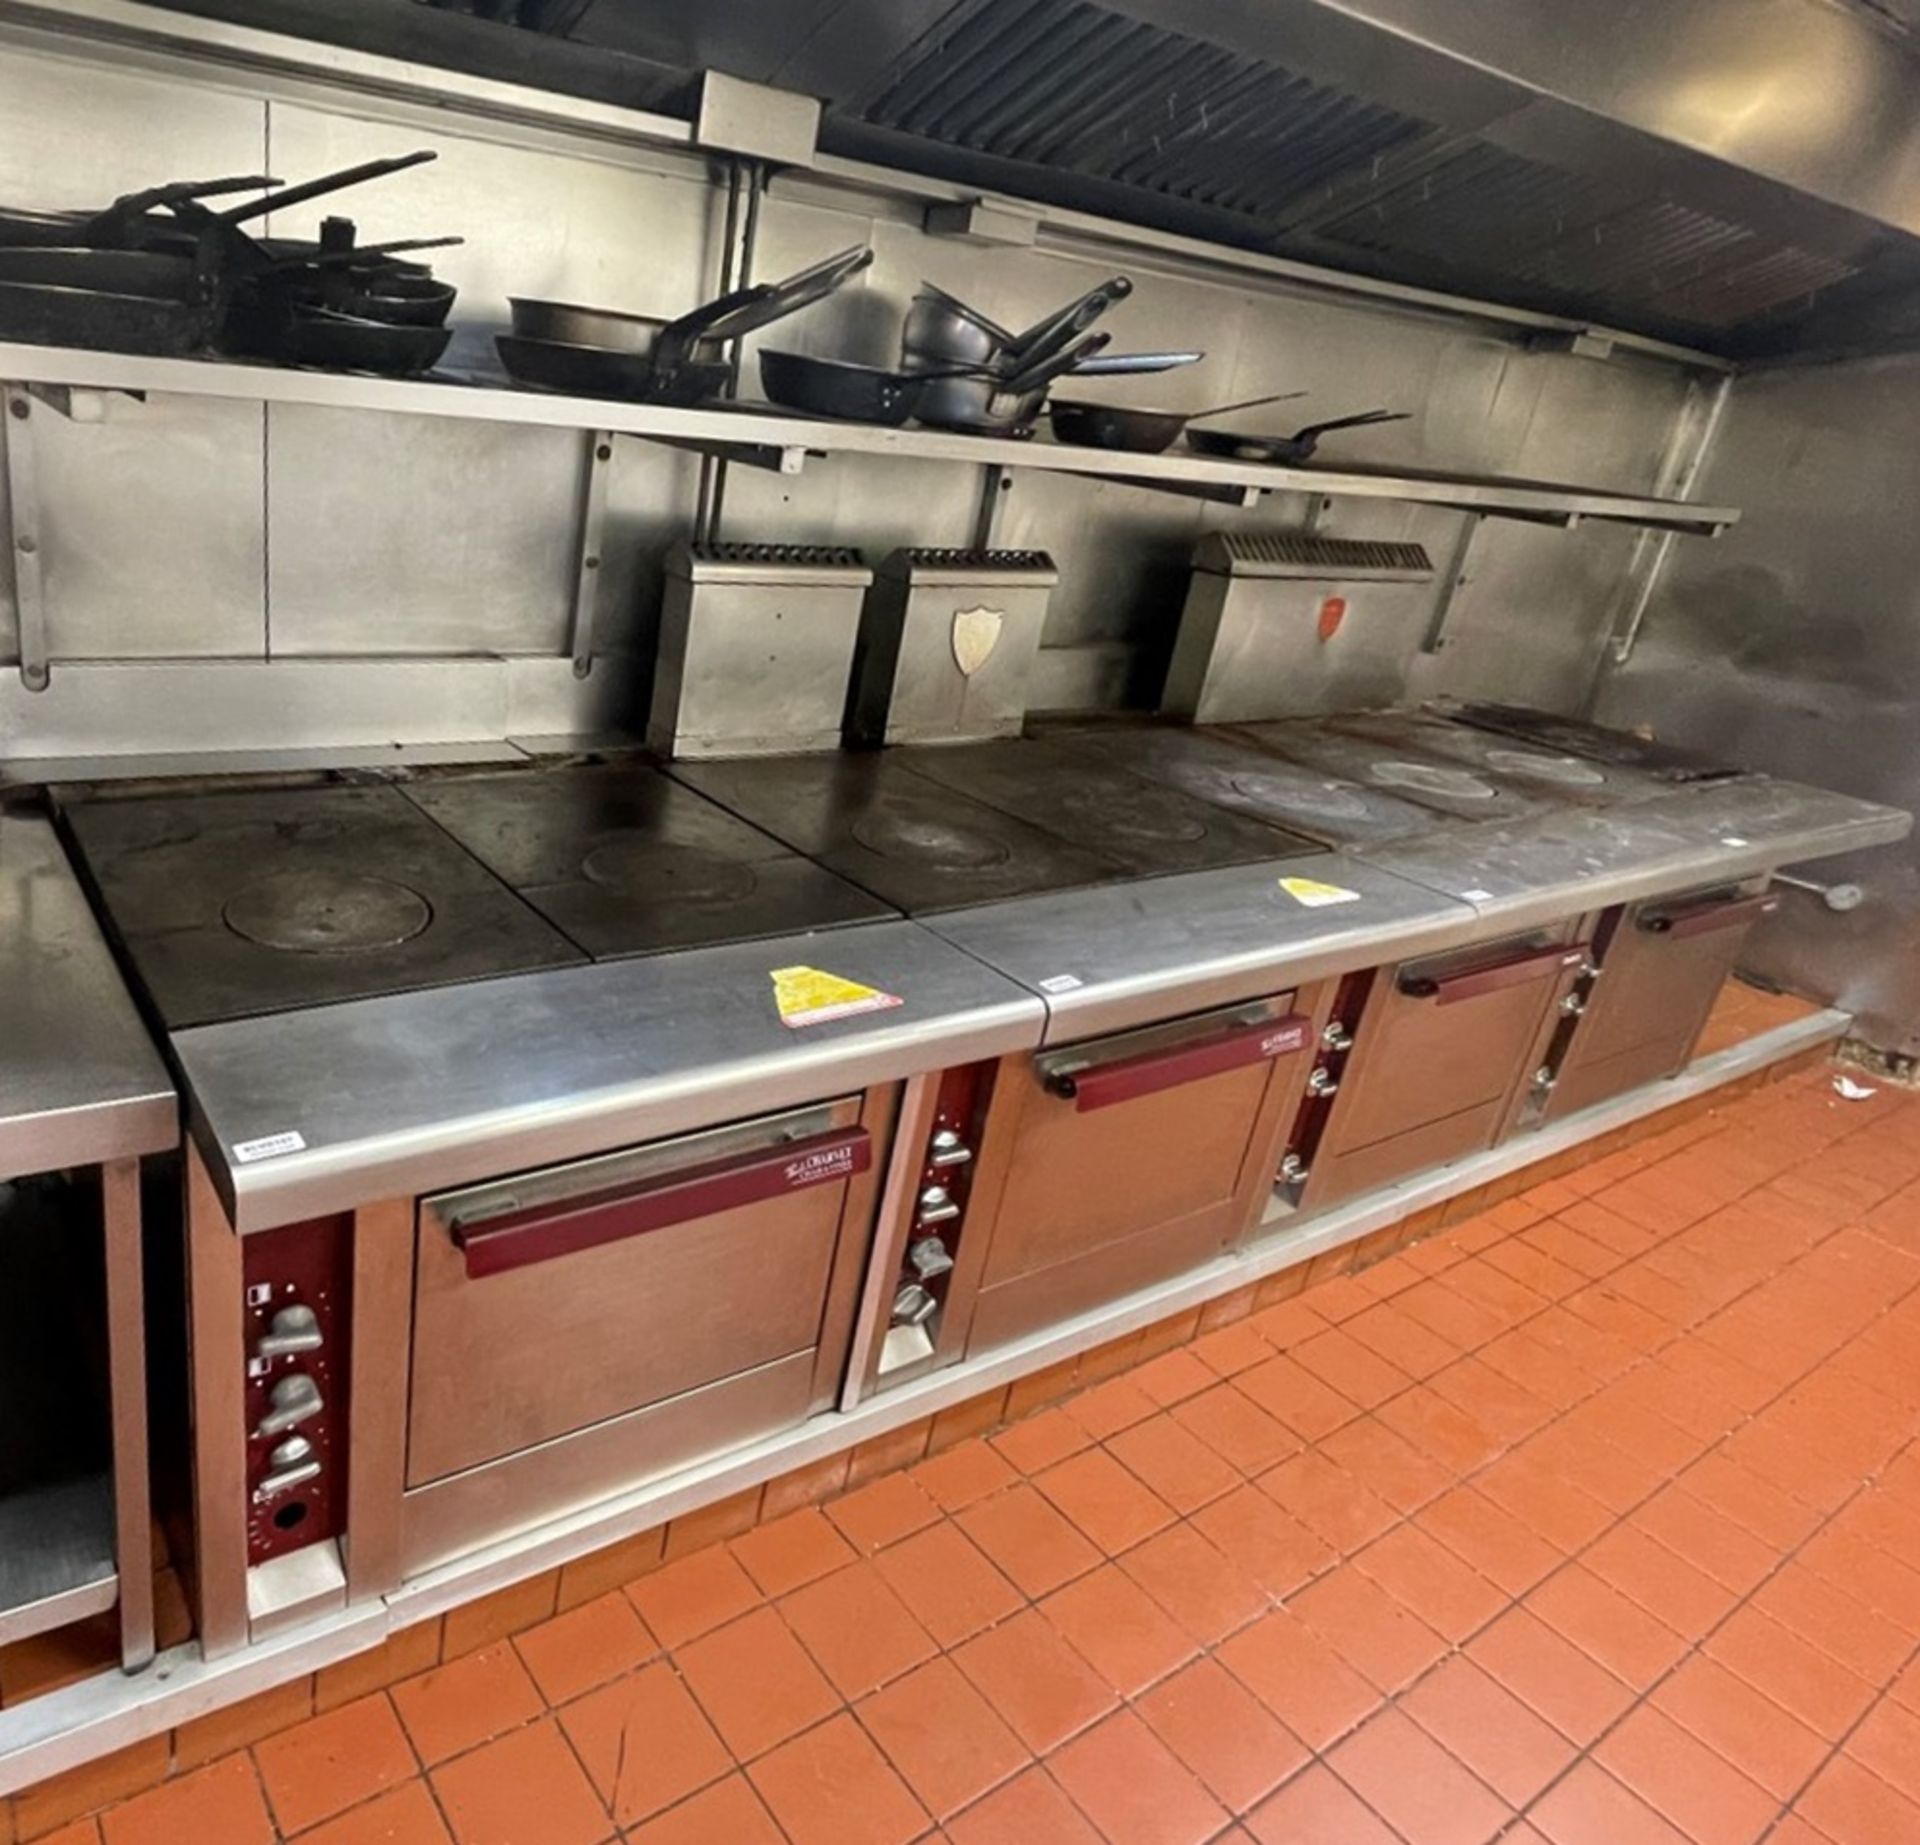 2 x Paul Charvet Charavines Target Griddle Range Cookers - Gas Fired - Ref: BLVD169 /170 - CL649 - - Image 8 of 8